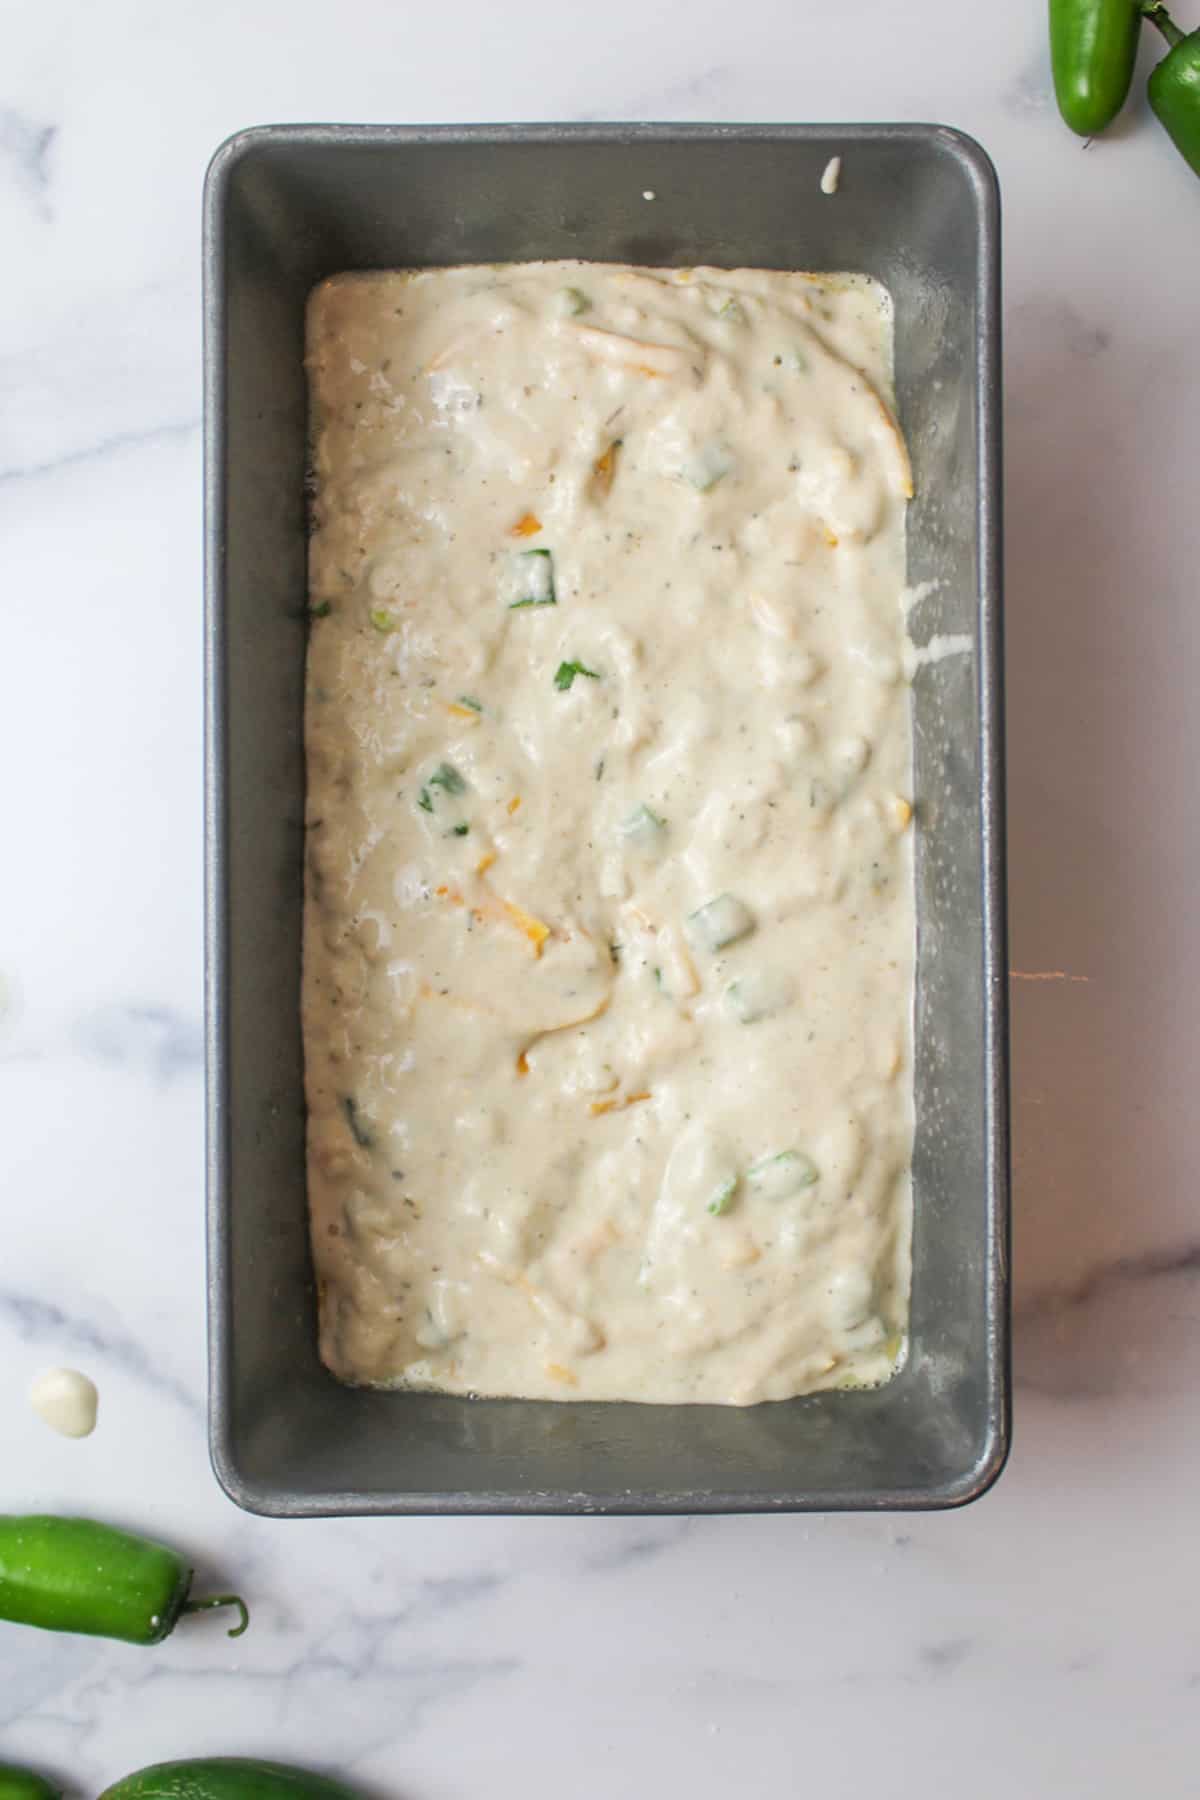 jalapeno cheddar beer bread batter in a bread pan.